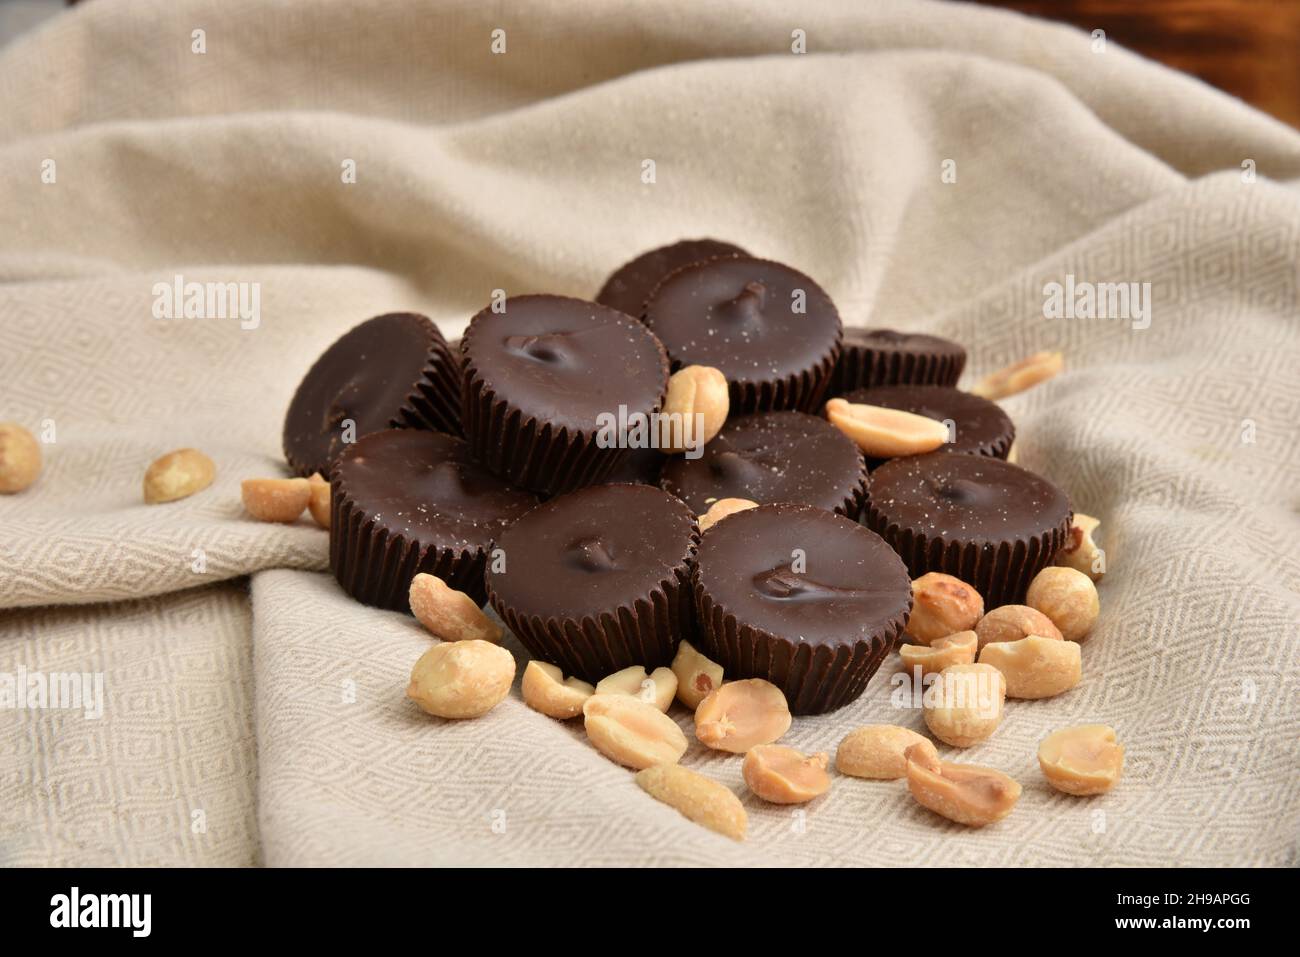 A mound of dark chocolate peanut butter cups with salted peanuts Stock Photo